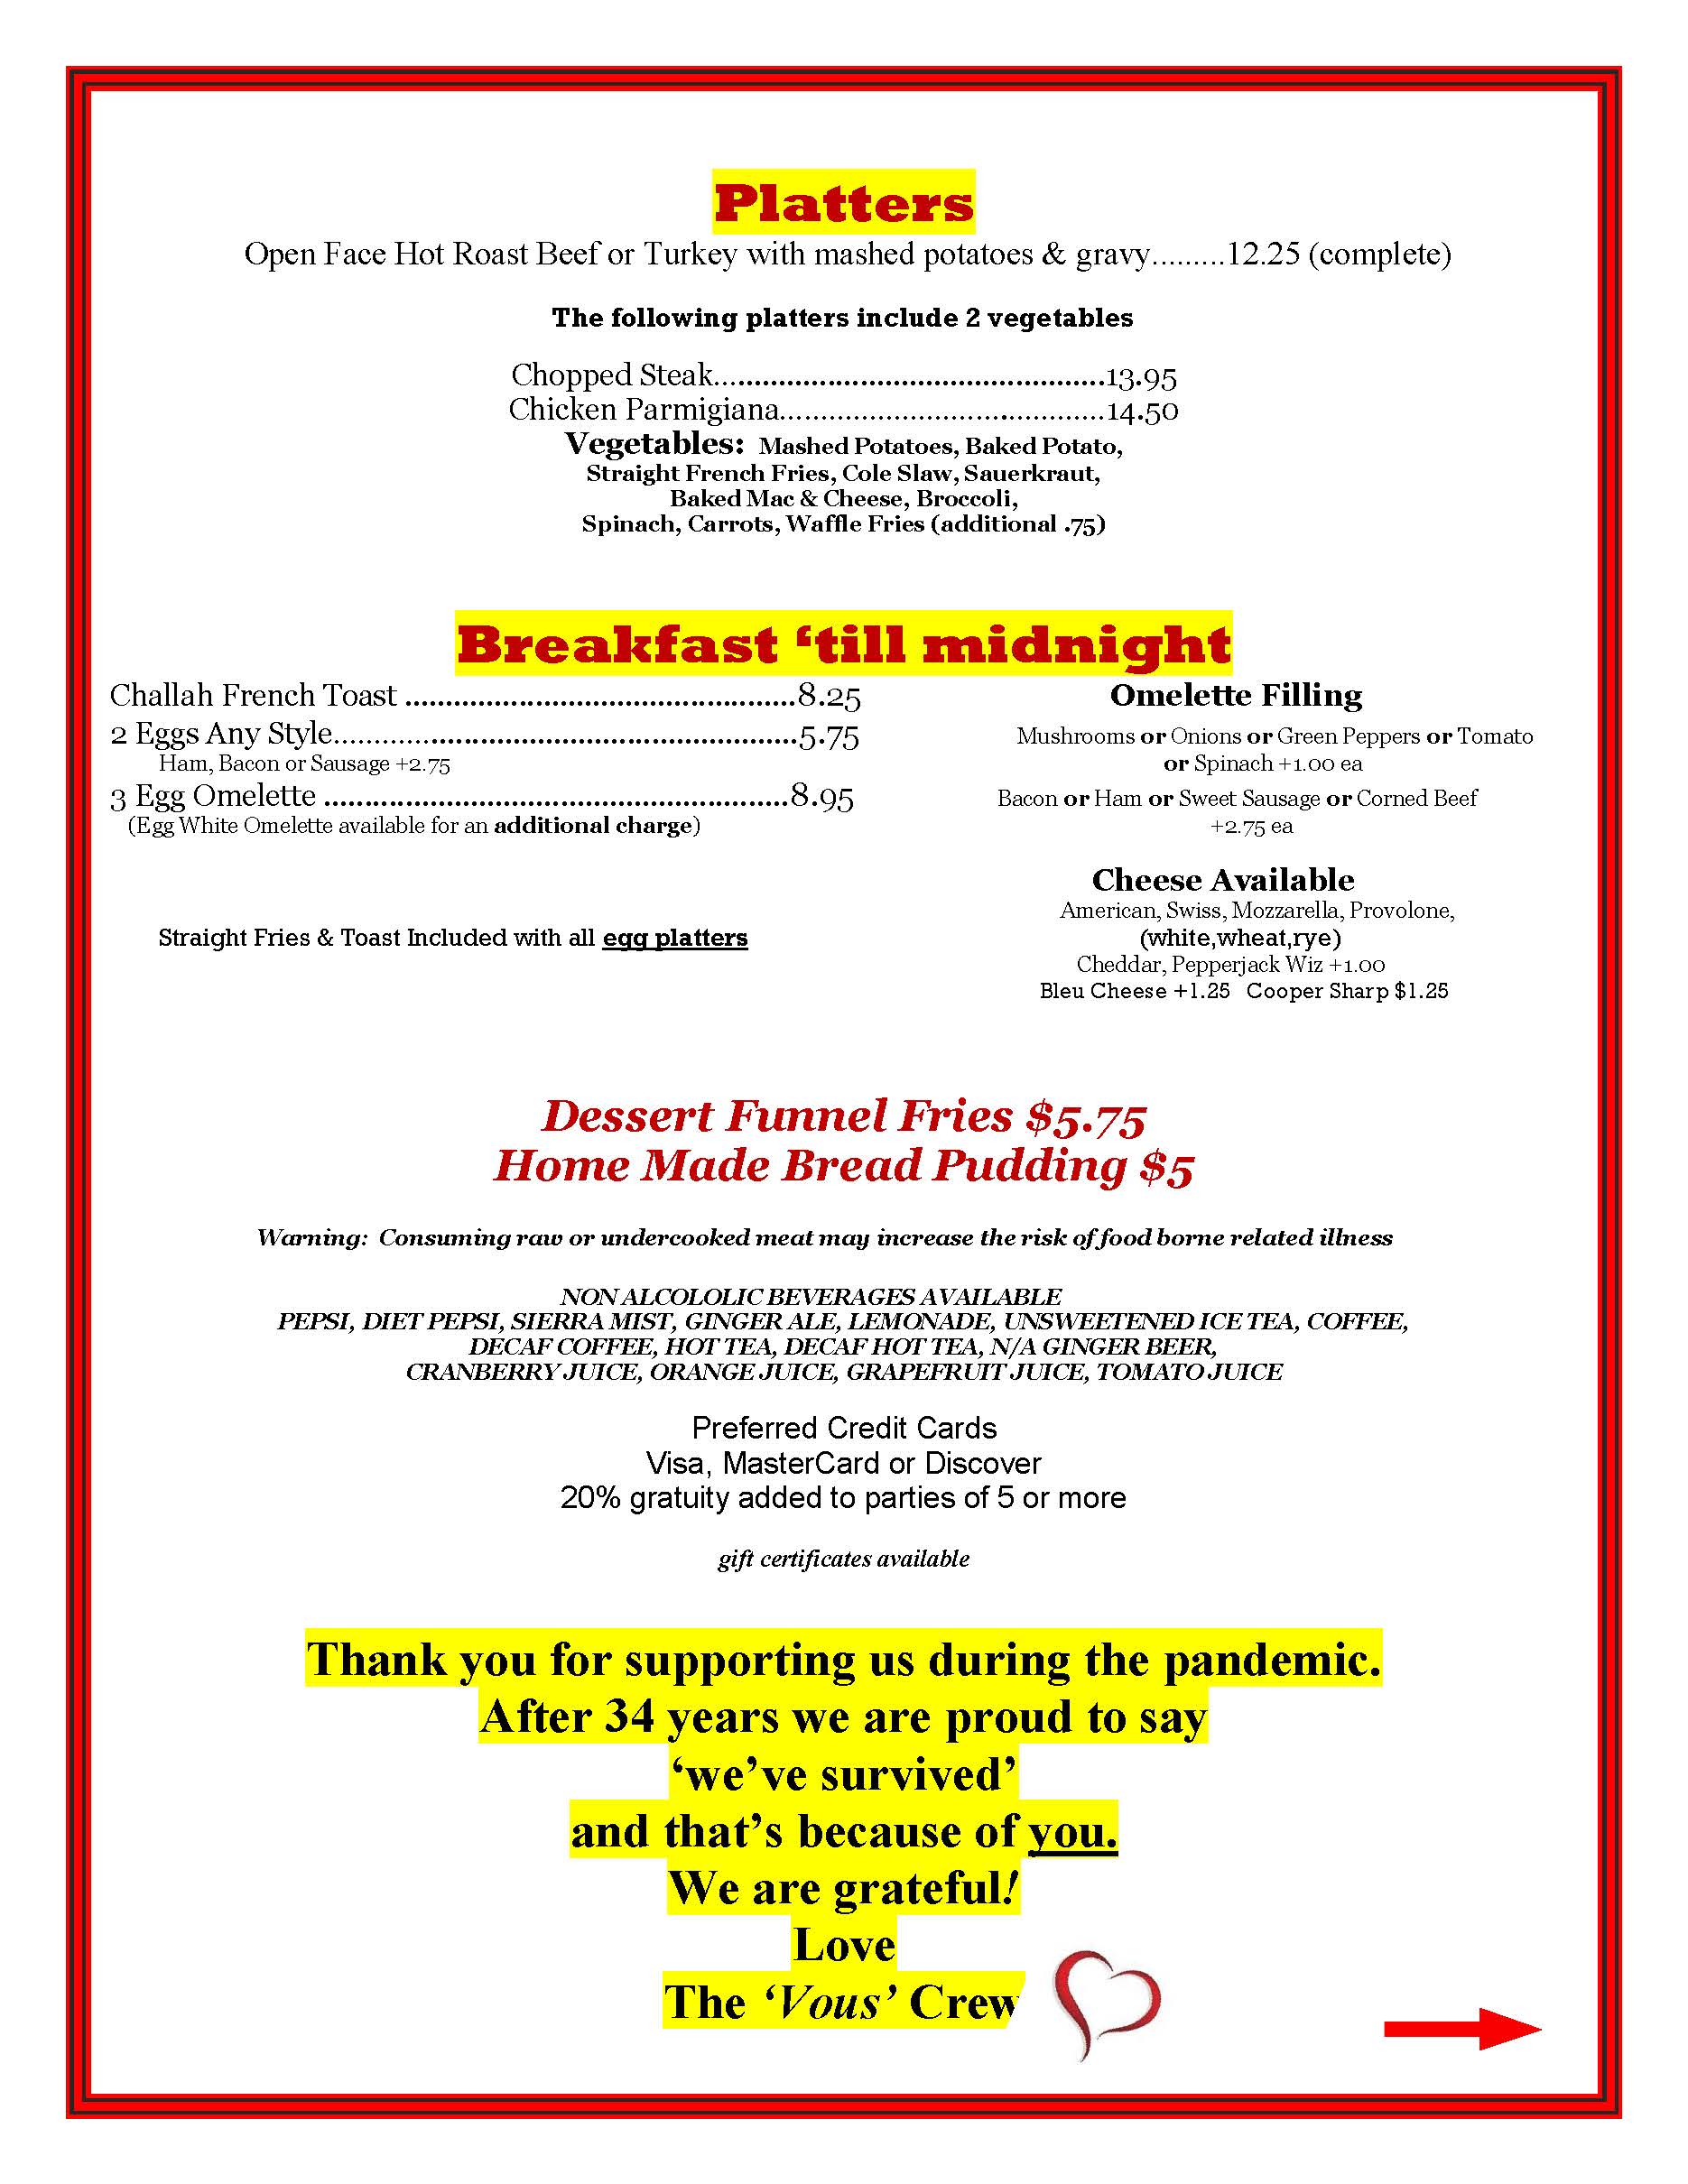 A flyer for a breakfast at midnight.